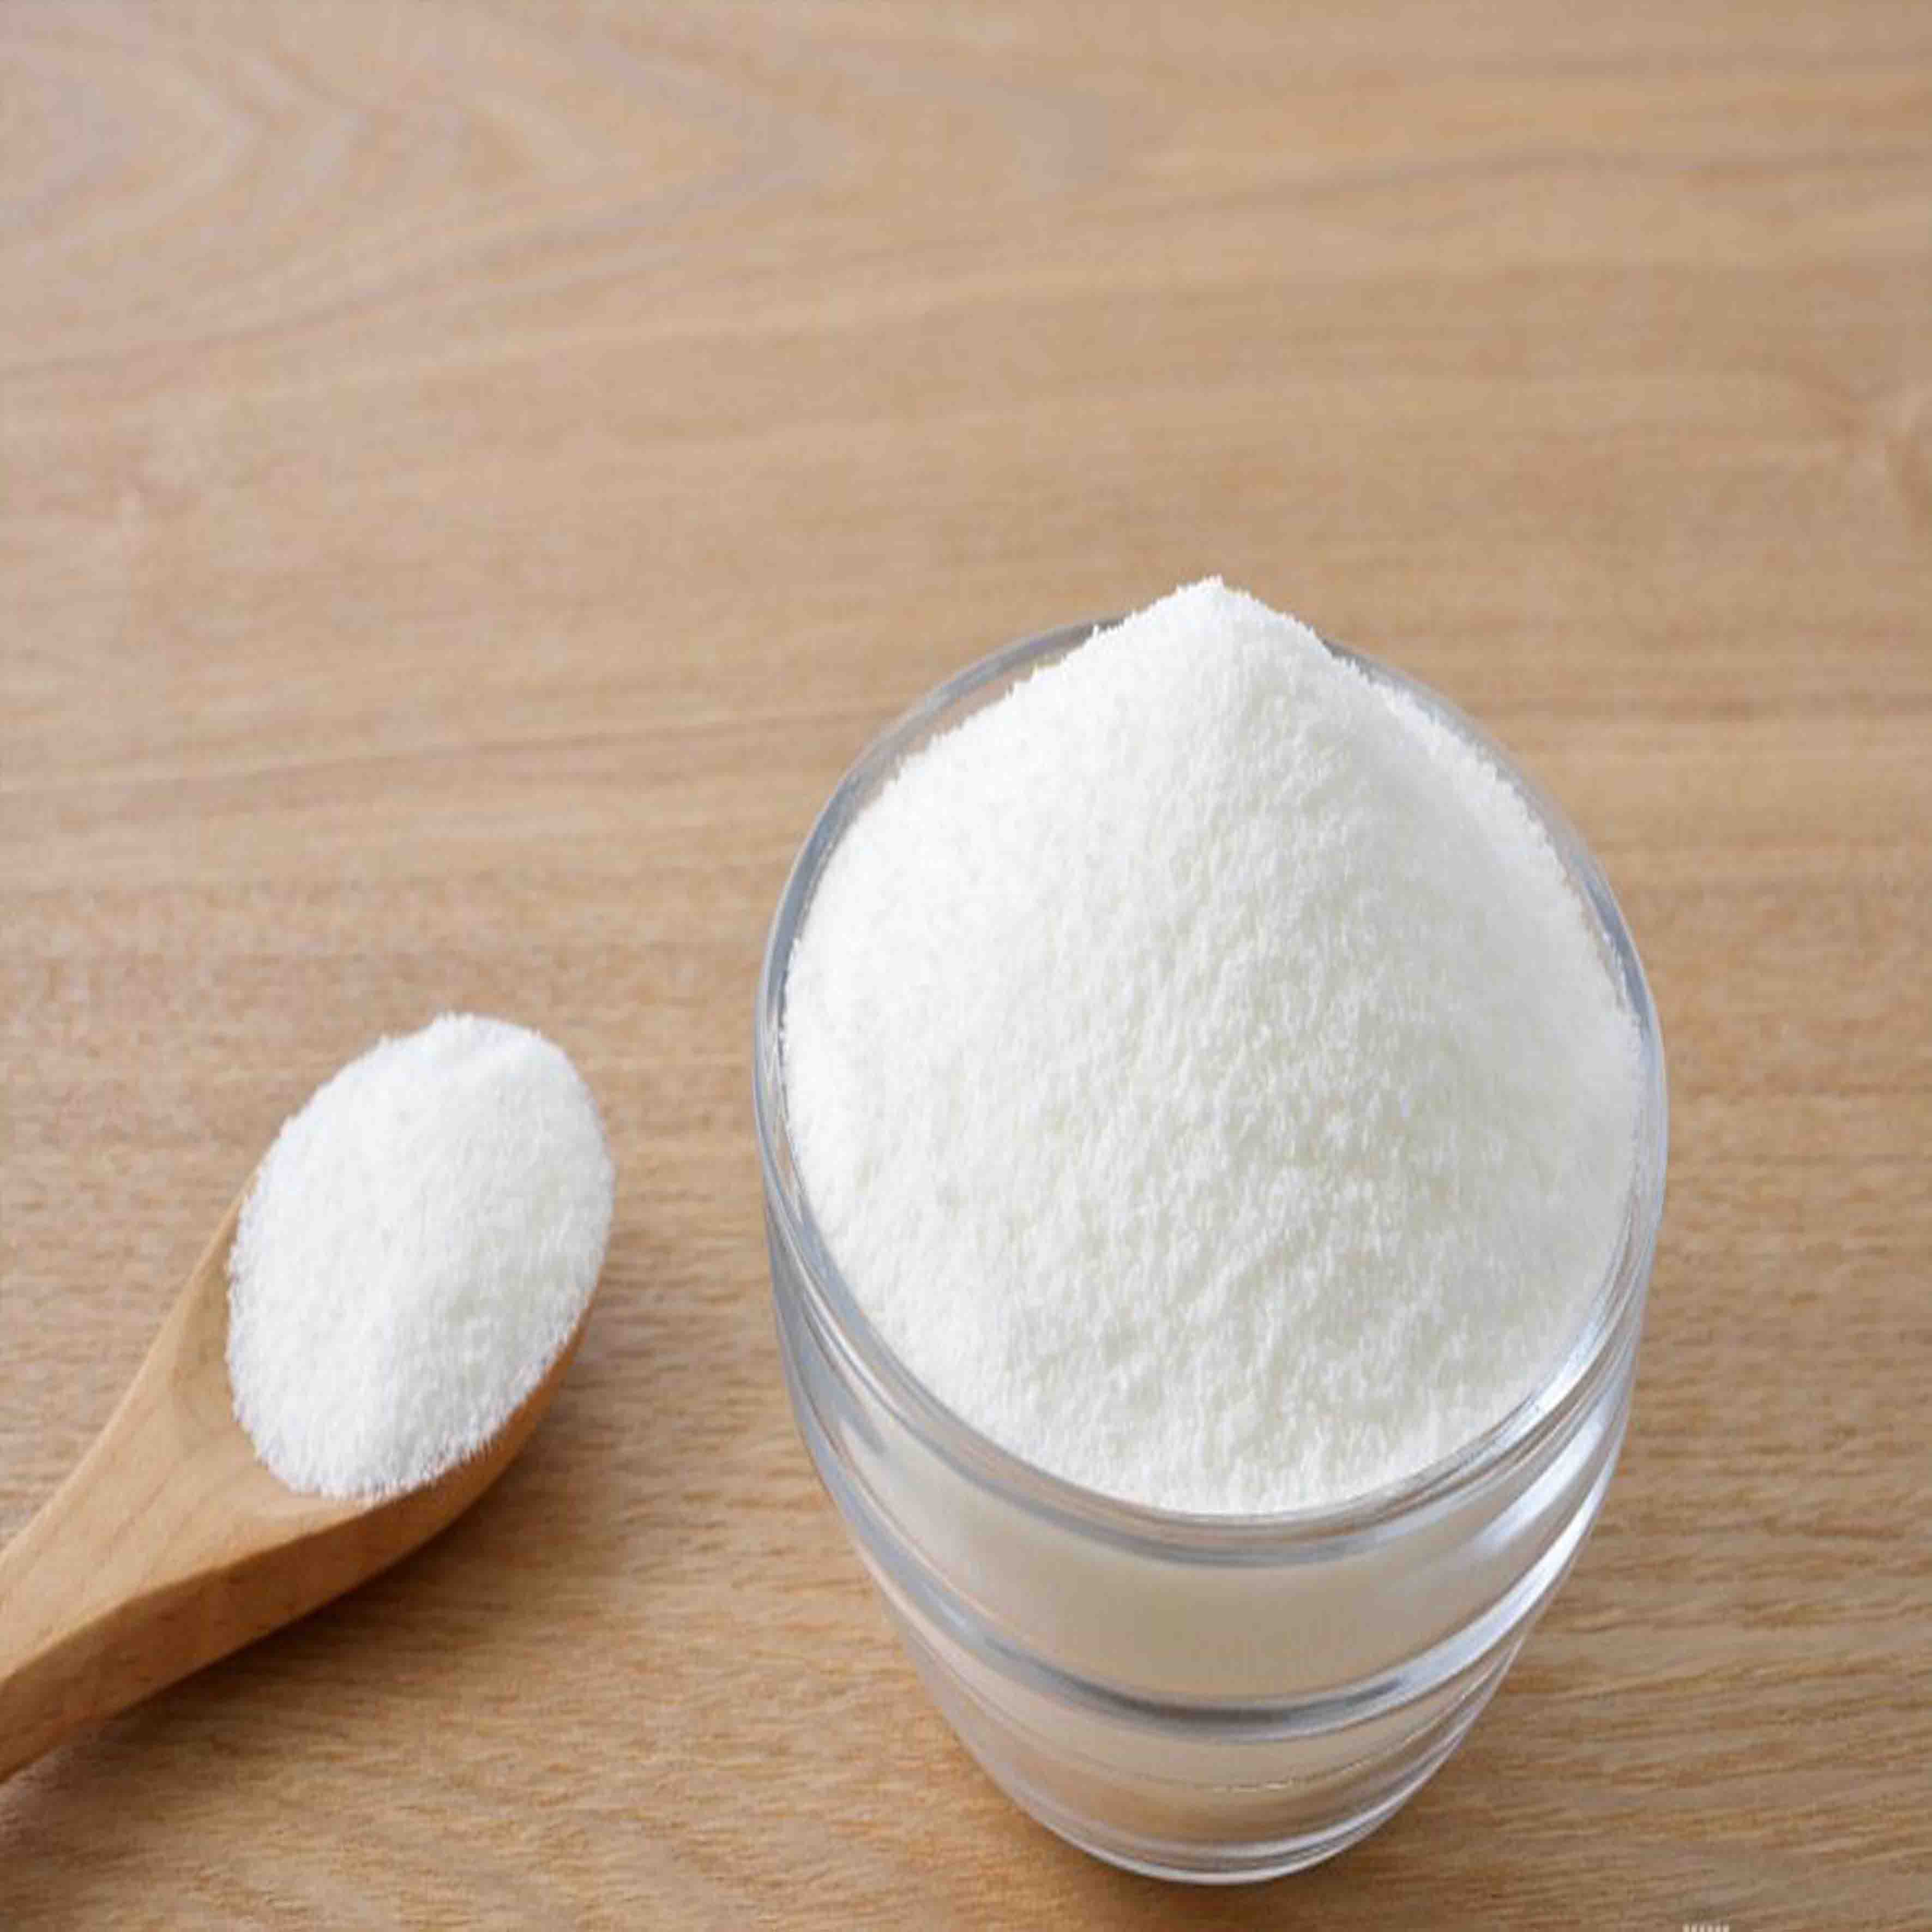 https://static.cnmqh.com/Titanium Dioxide is one of the most common food additives in the U.S.-tio2